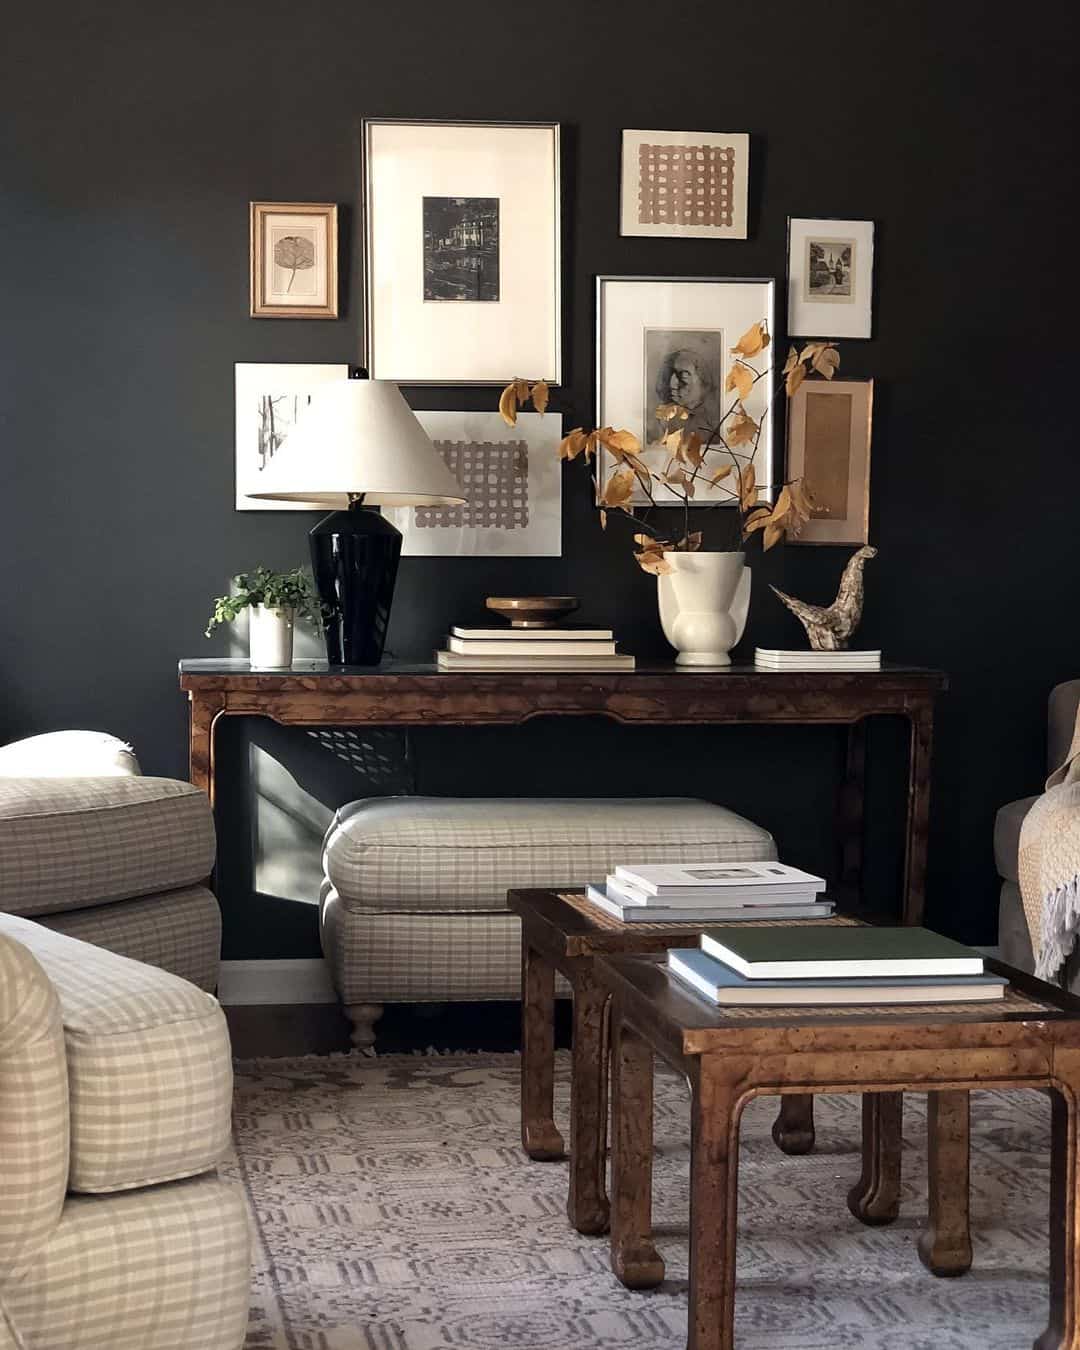 Bold Contrast: Charcoal Black Walls with Neutral-Toned Portraits